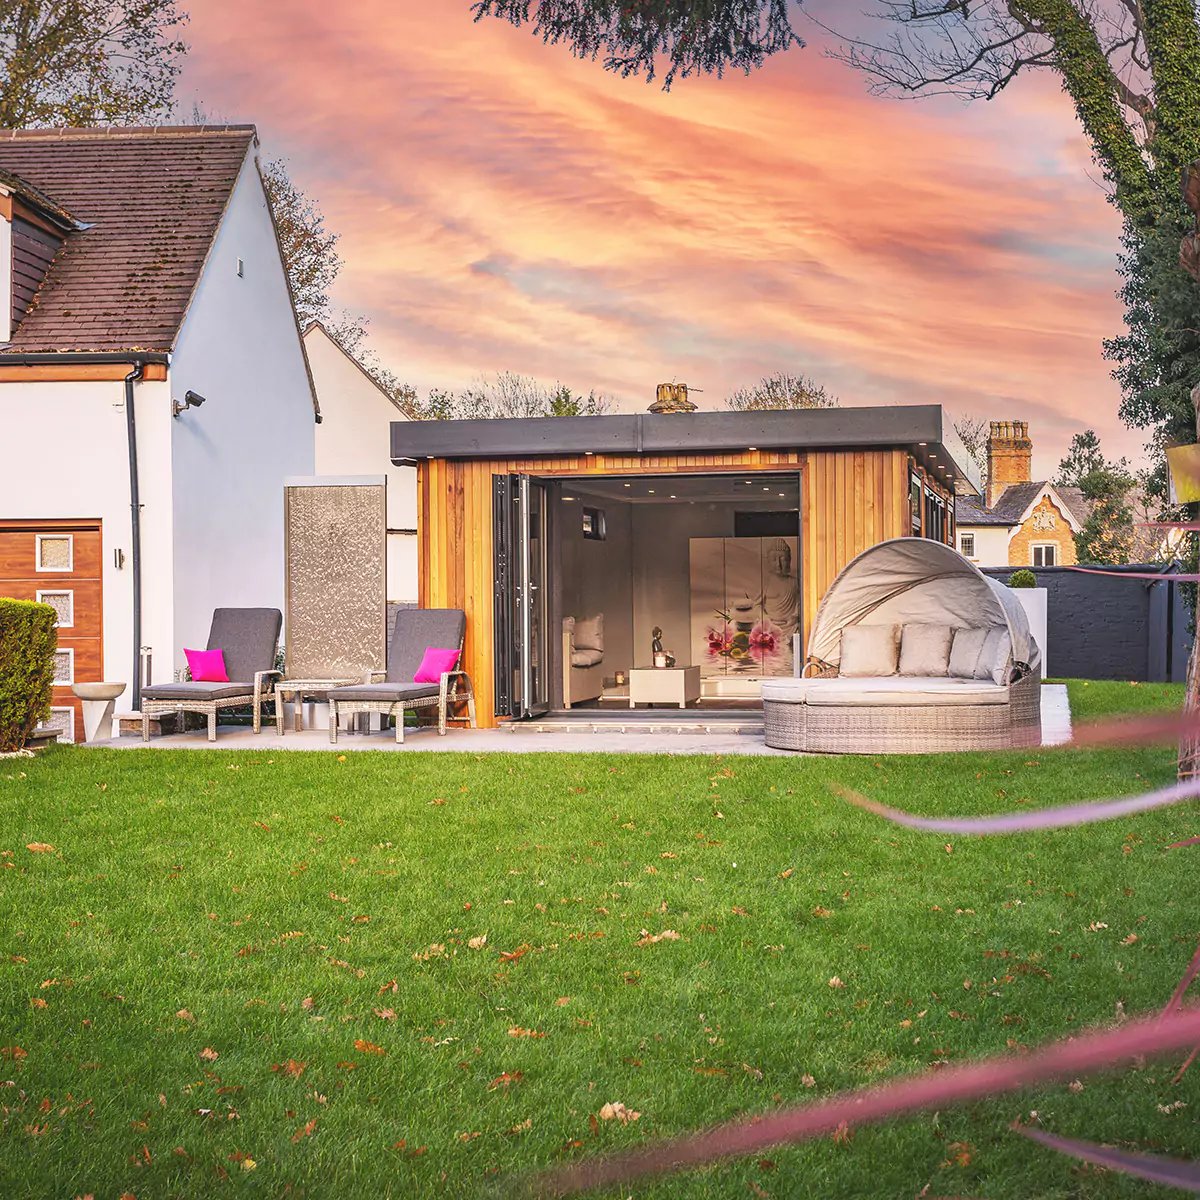 External shot of a summer house at dusk with beautiful pink sky